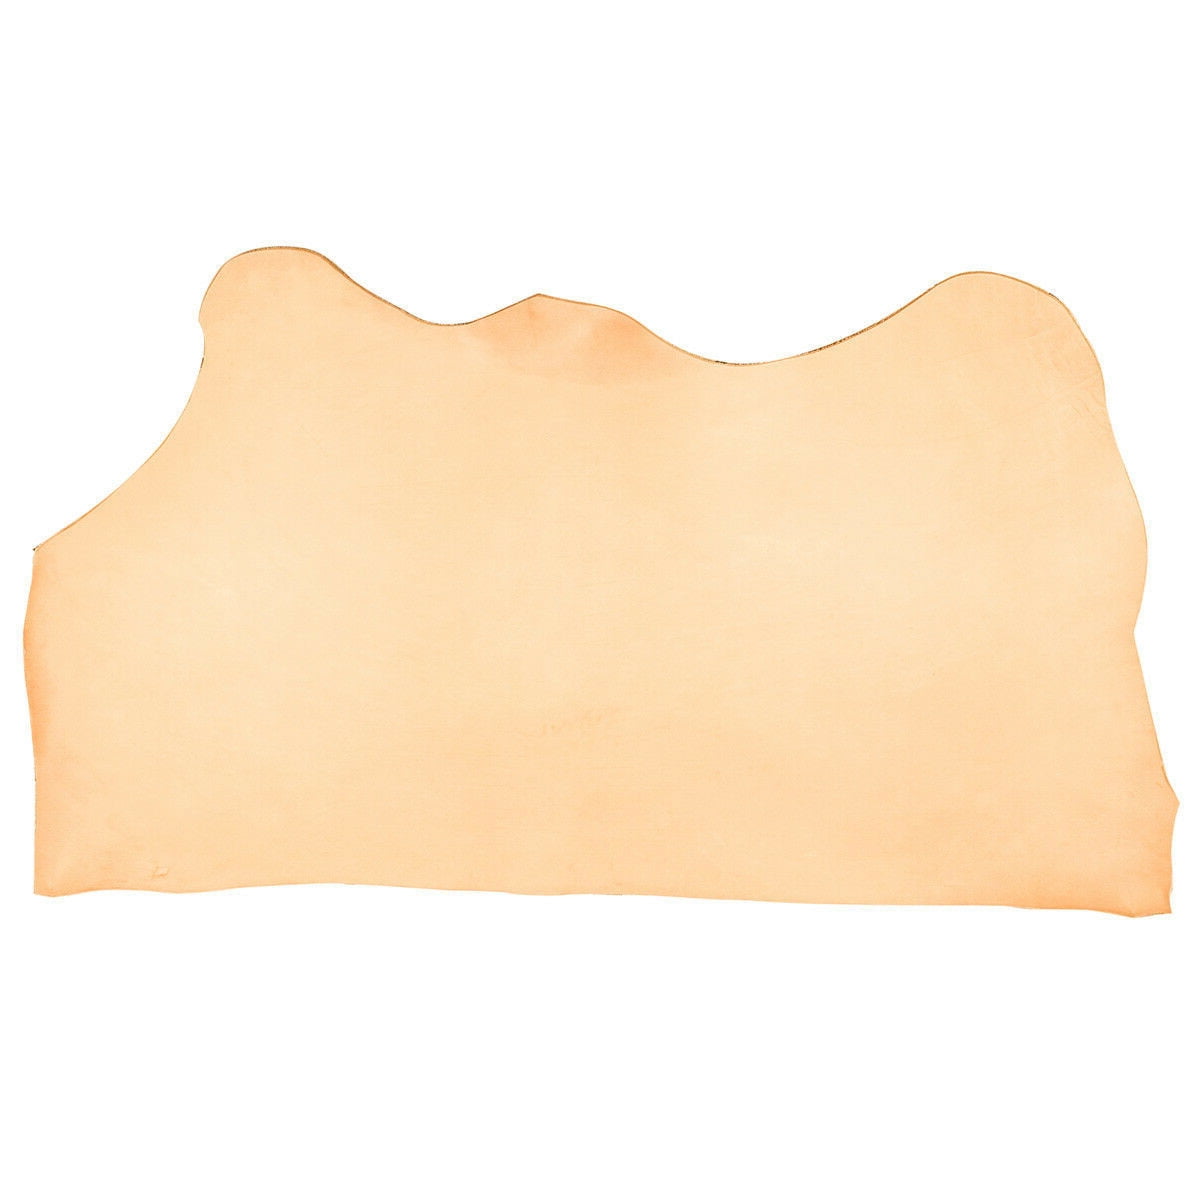 Select Size. 11 oz Vegetable Tanned Cowhide Tooling Leather 